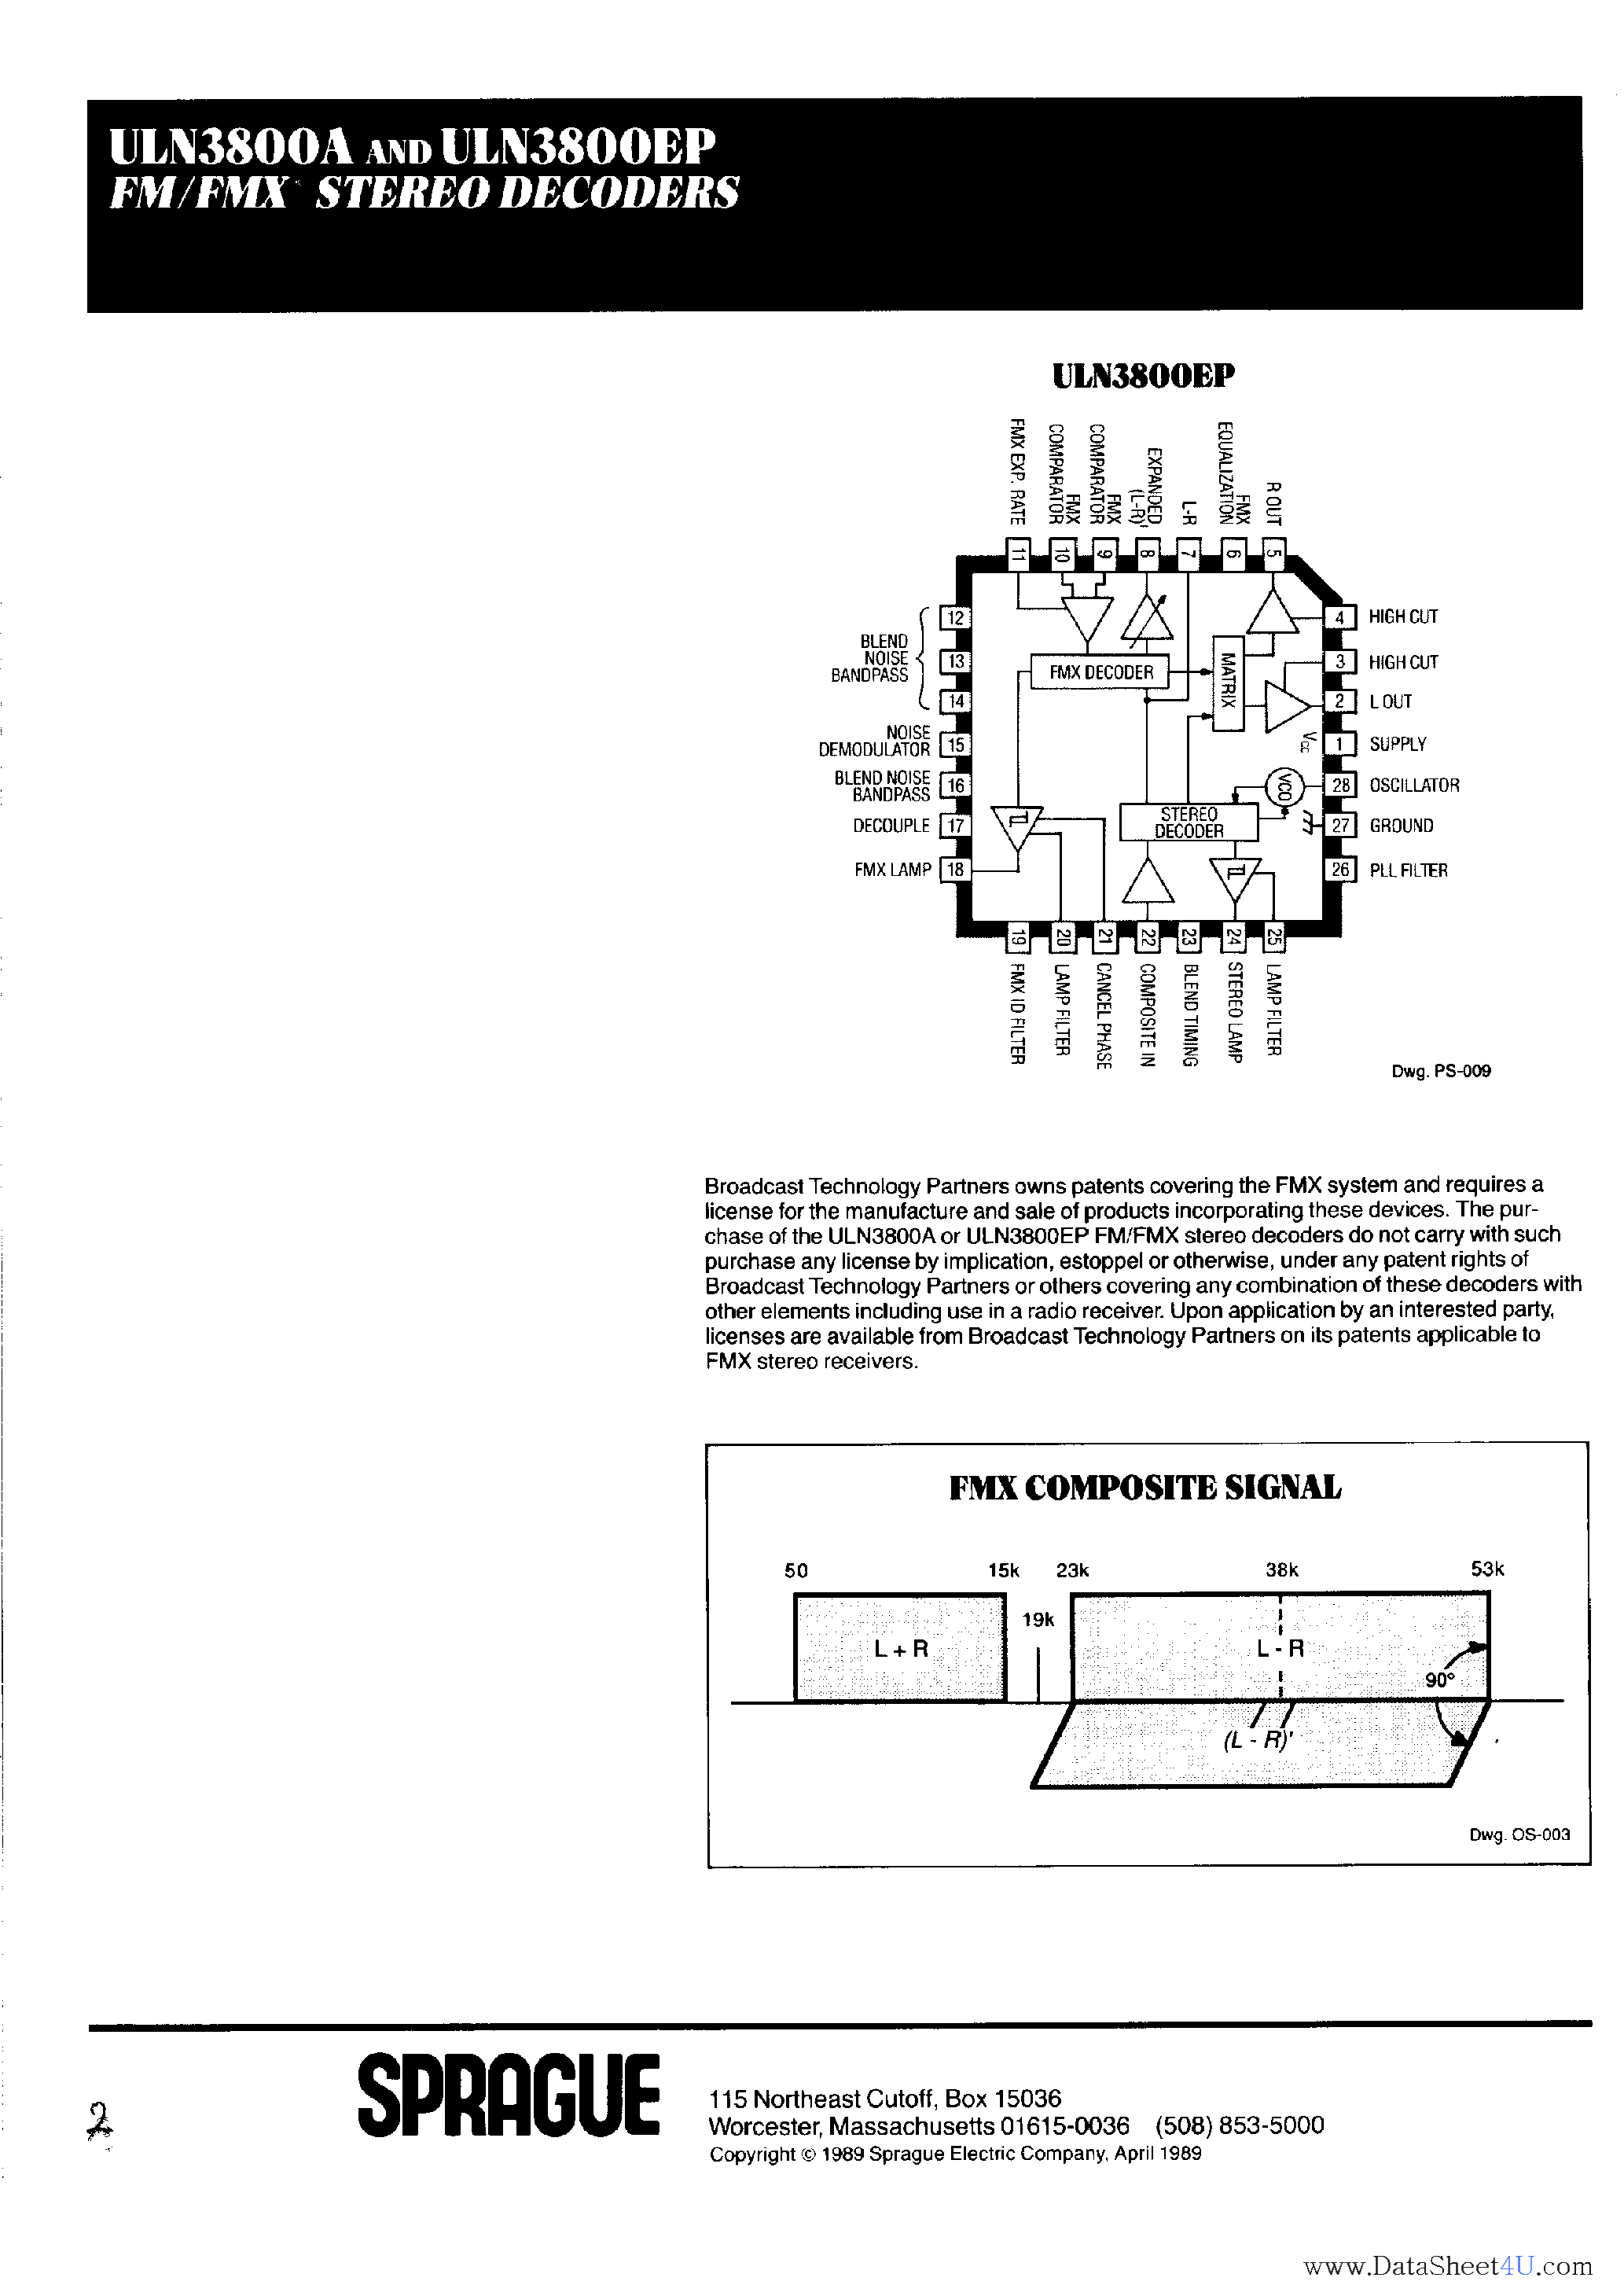 Datasheet ULN3800A - FM / FMX Stereo Decoders page 2